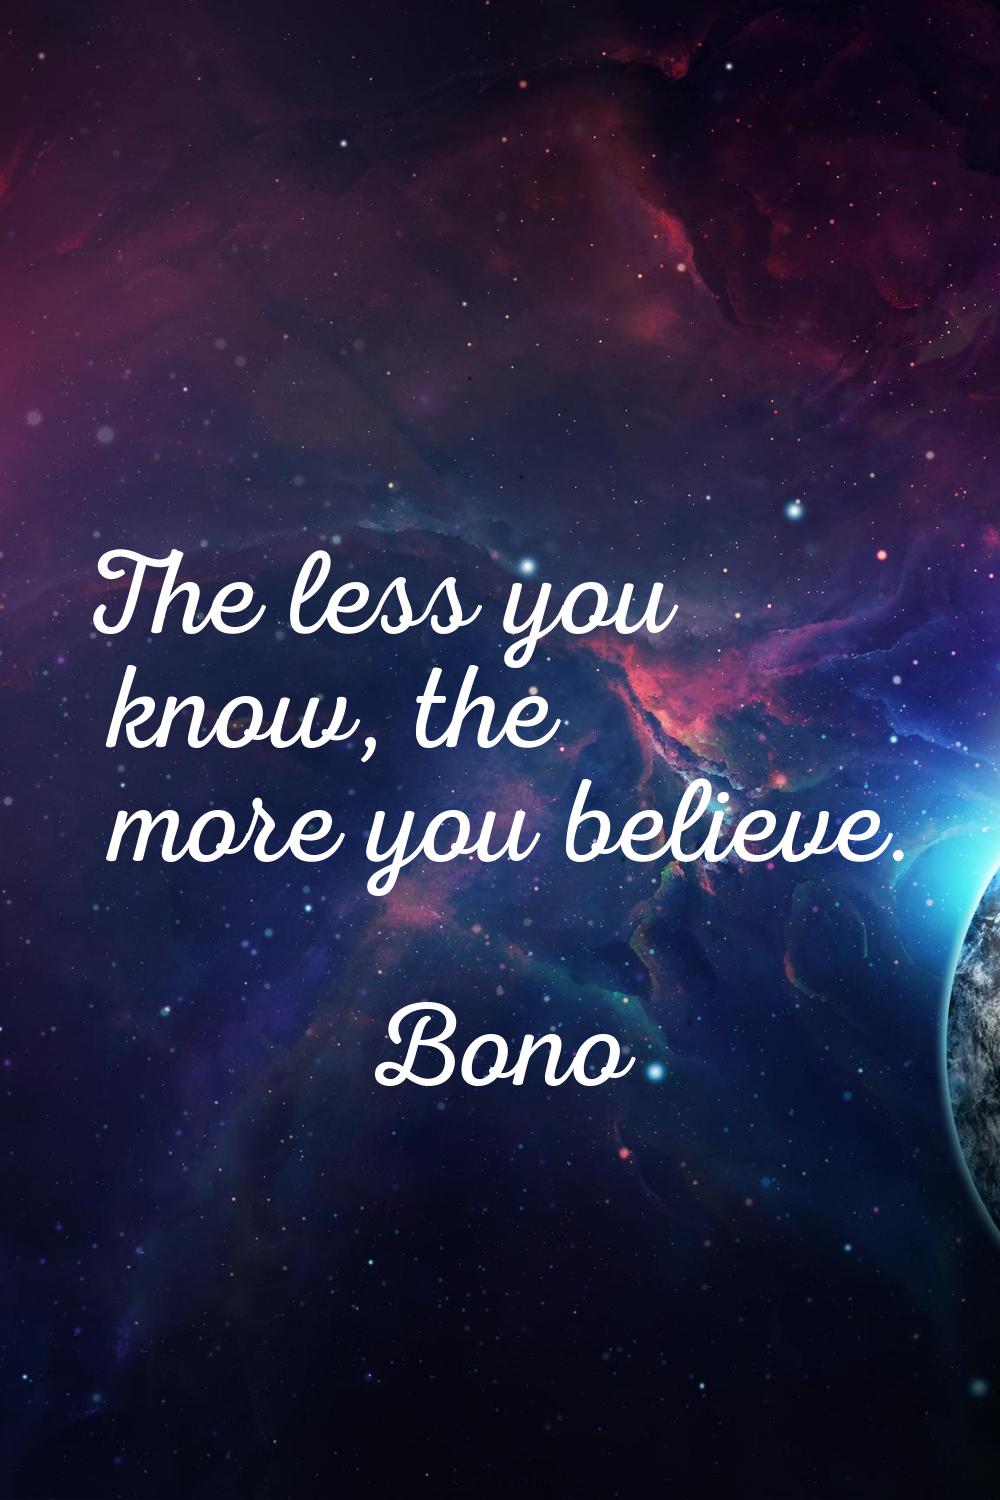 The less you know, the more you believe.